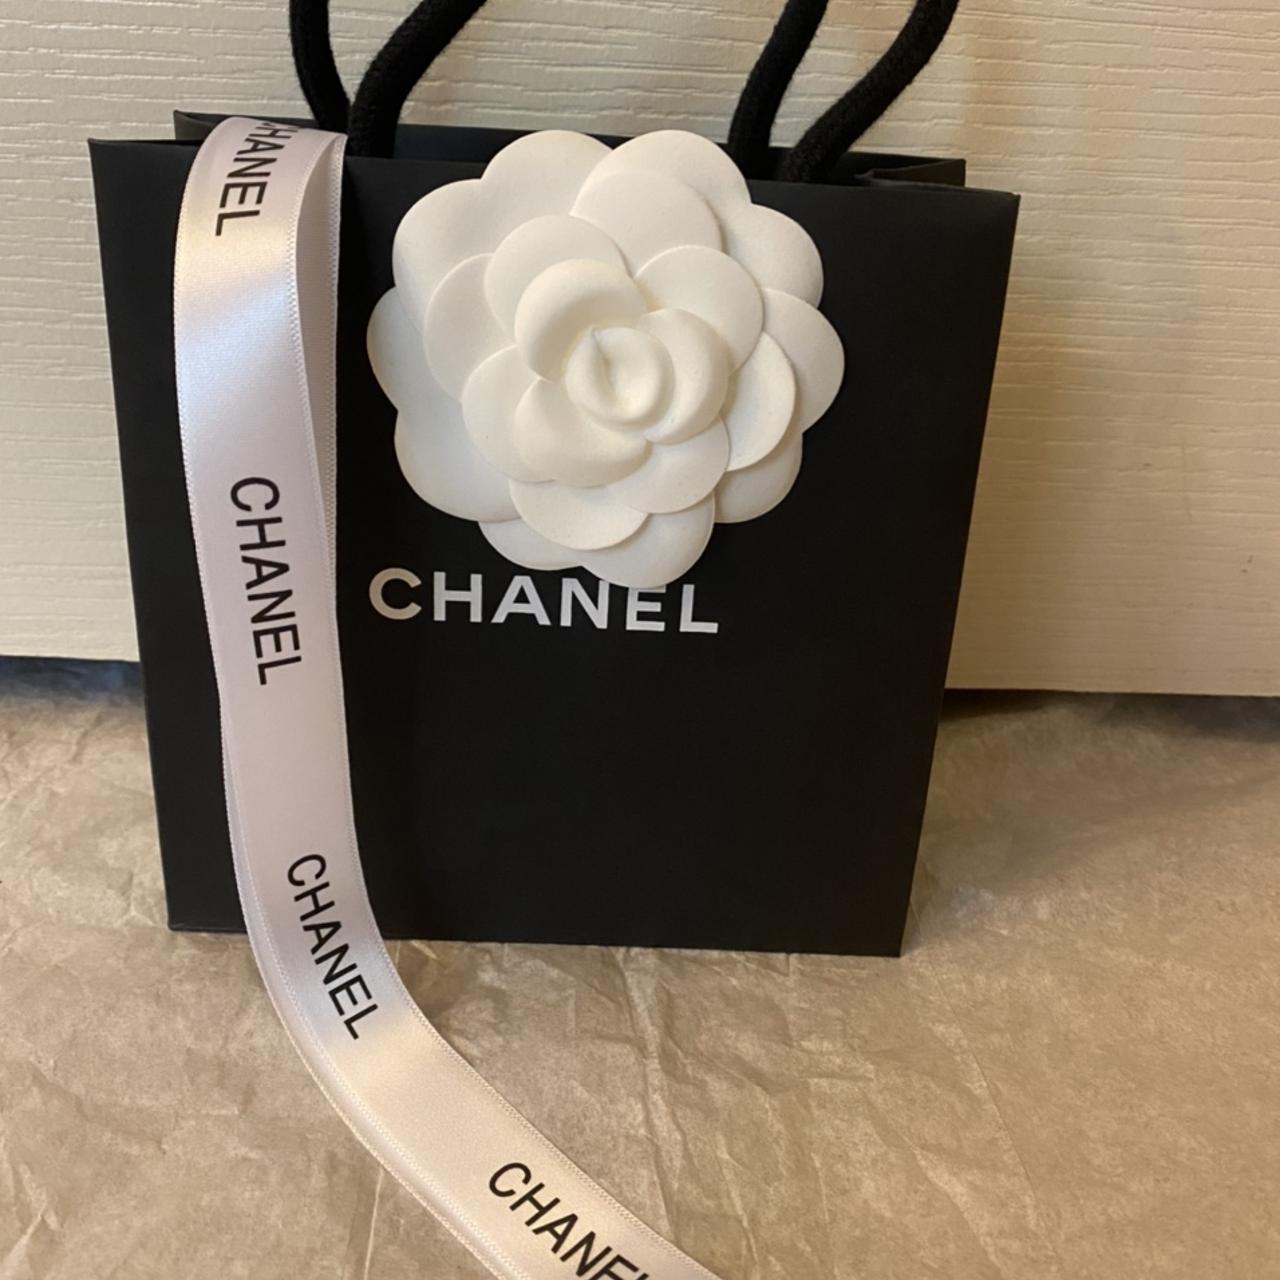 Chanel gifts bag. Size 5.5x5.5x2